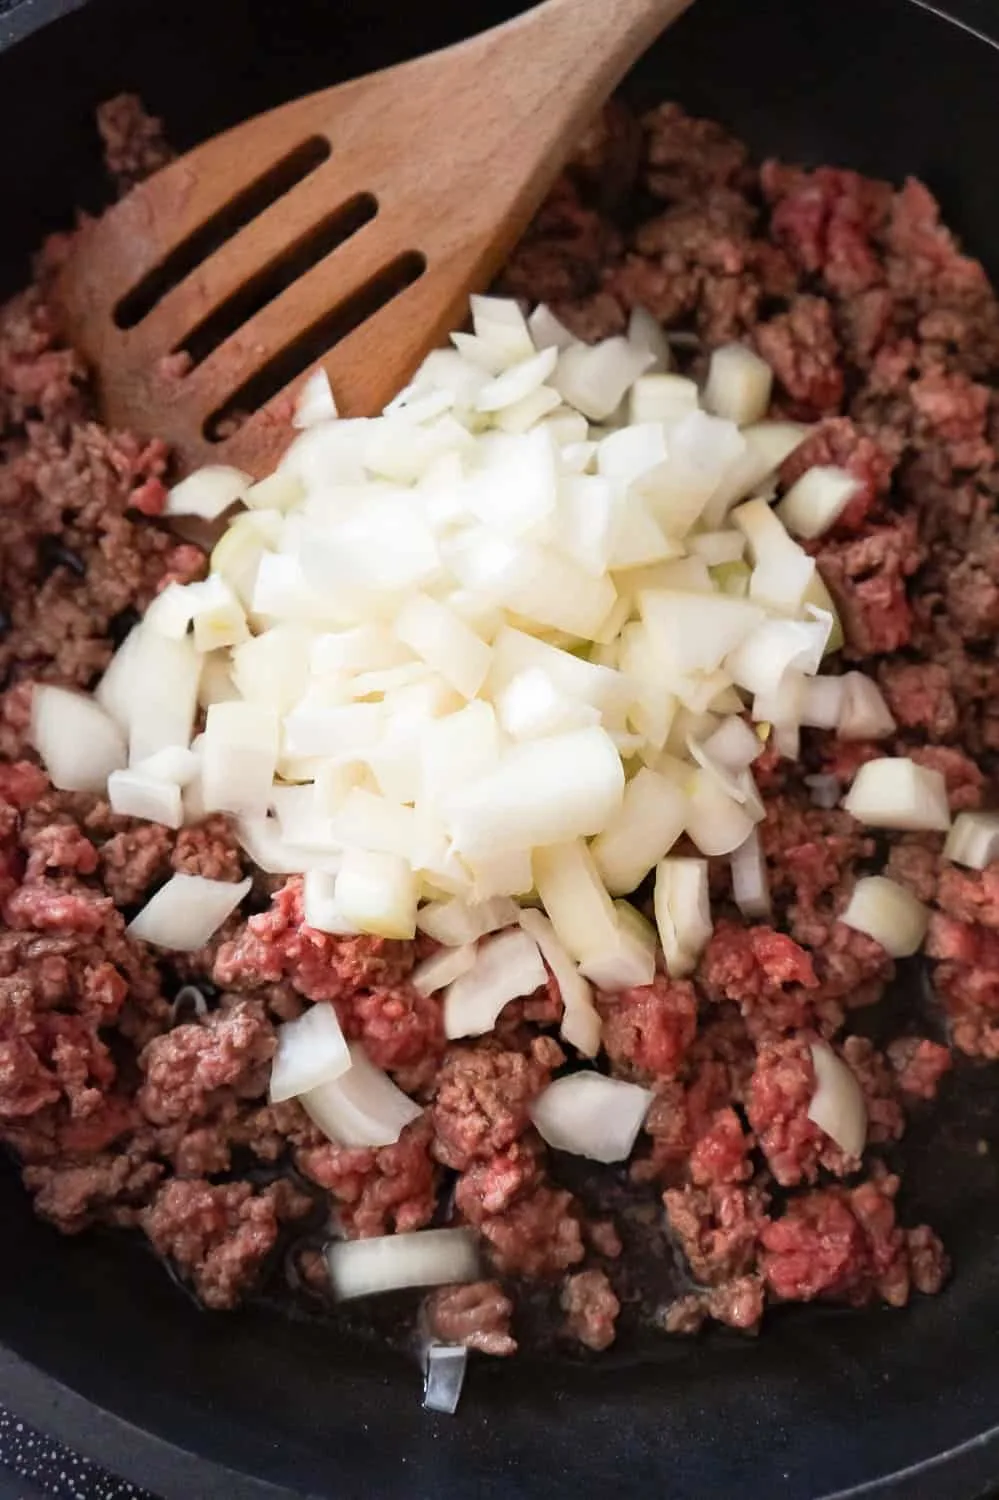 diced onion on top of raw ground beef in a frying pan